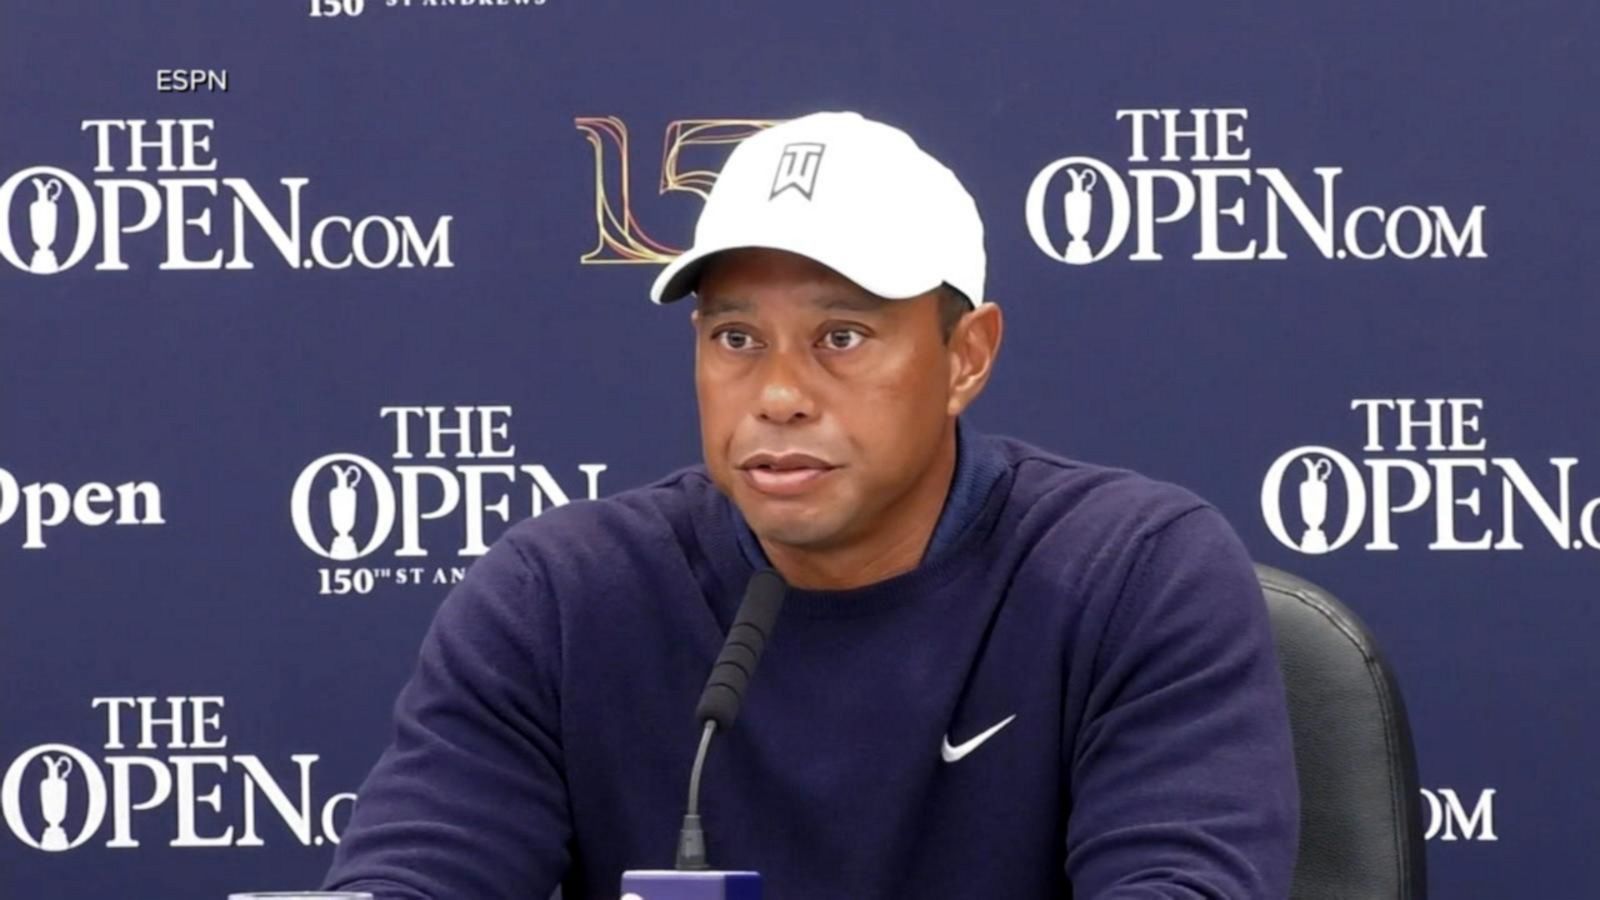 Tiger Woods meets with PGA golfers amidst controversy with LIV series